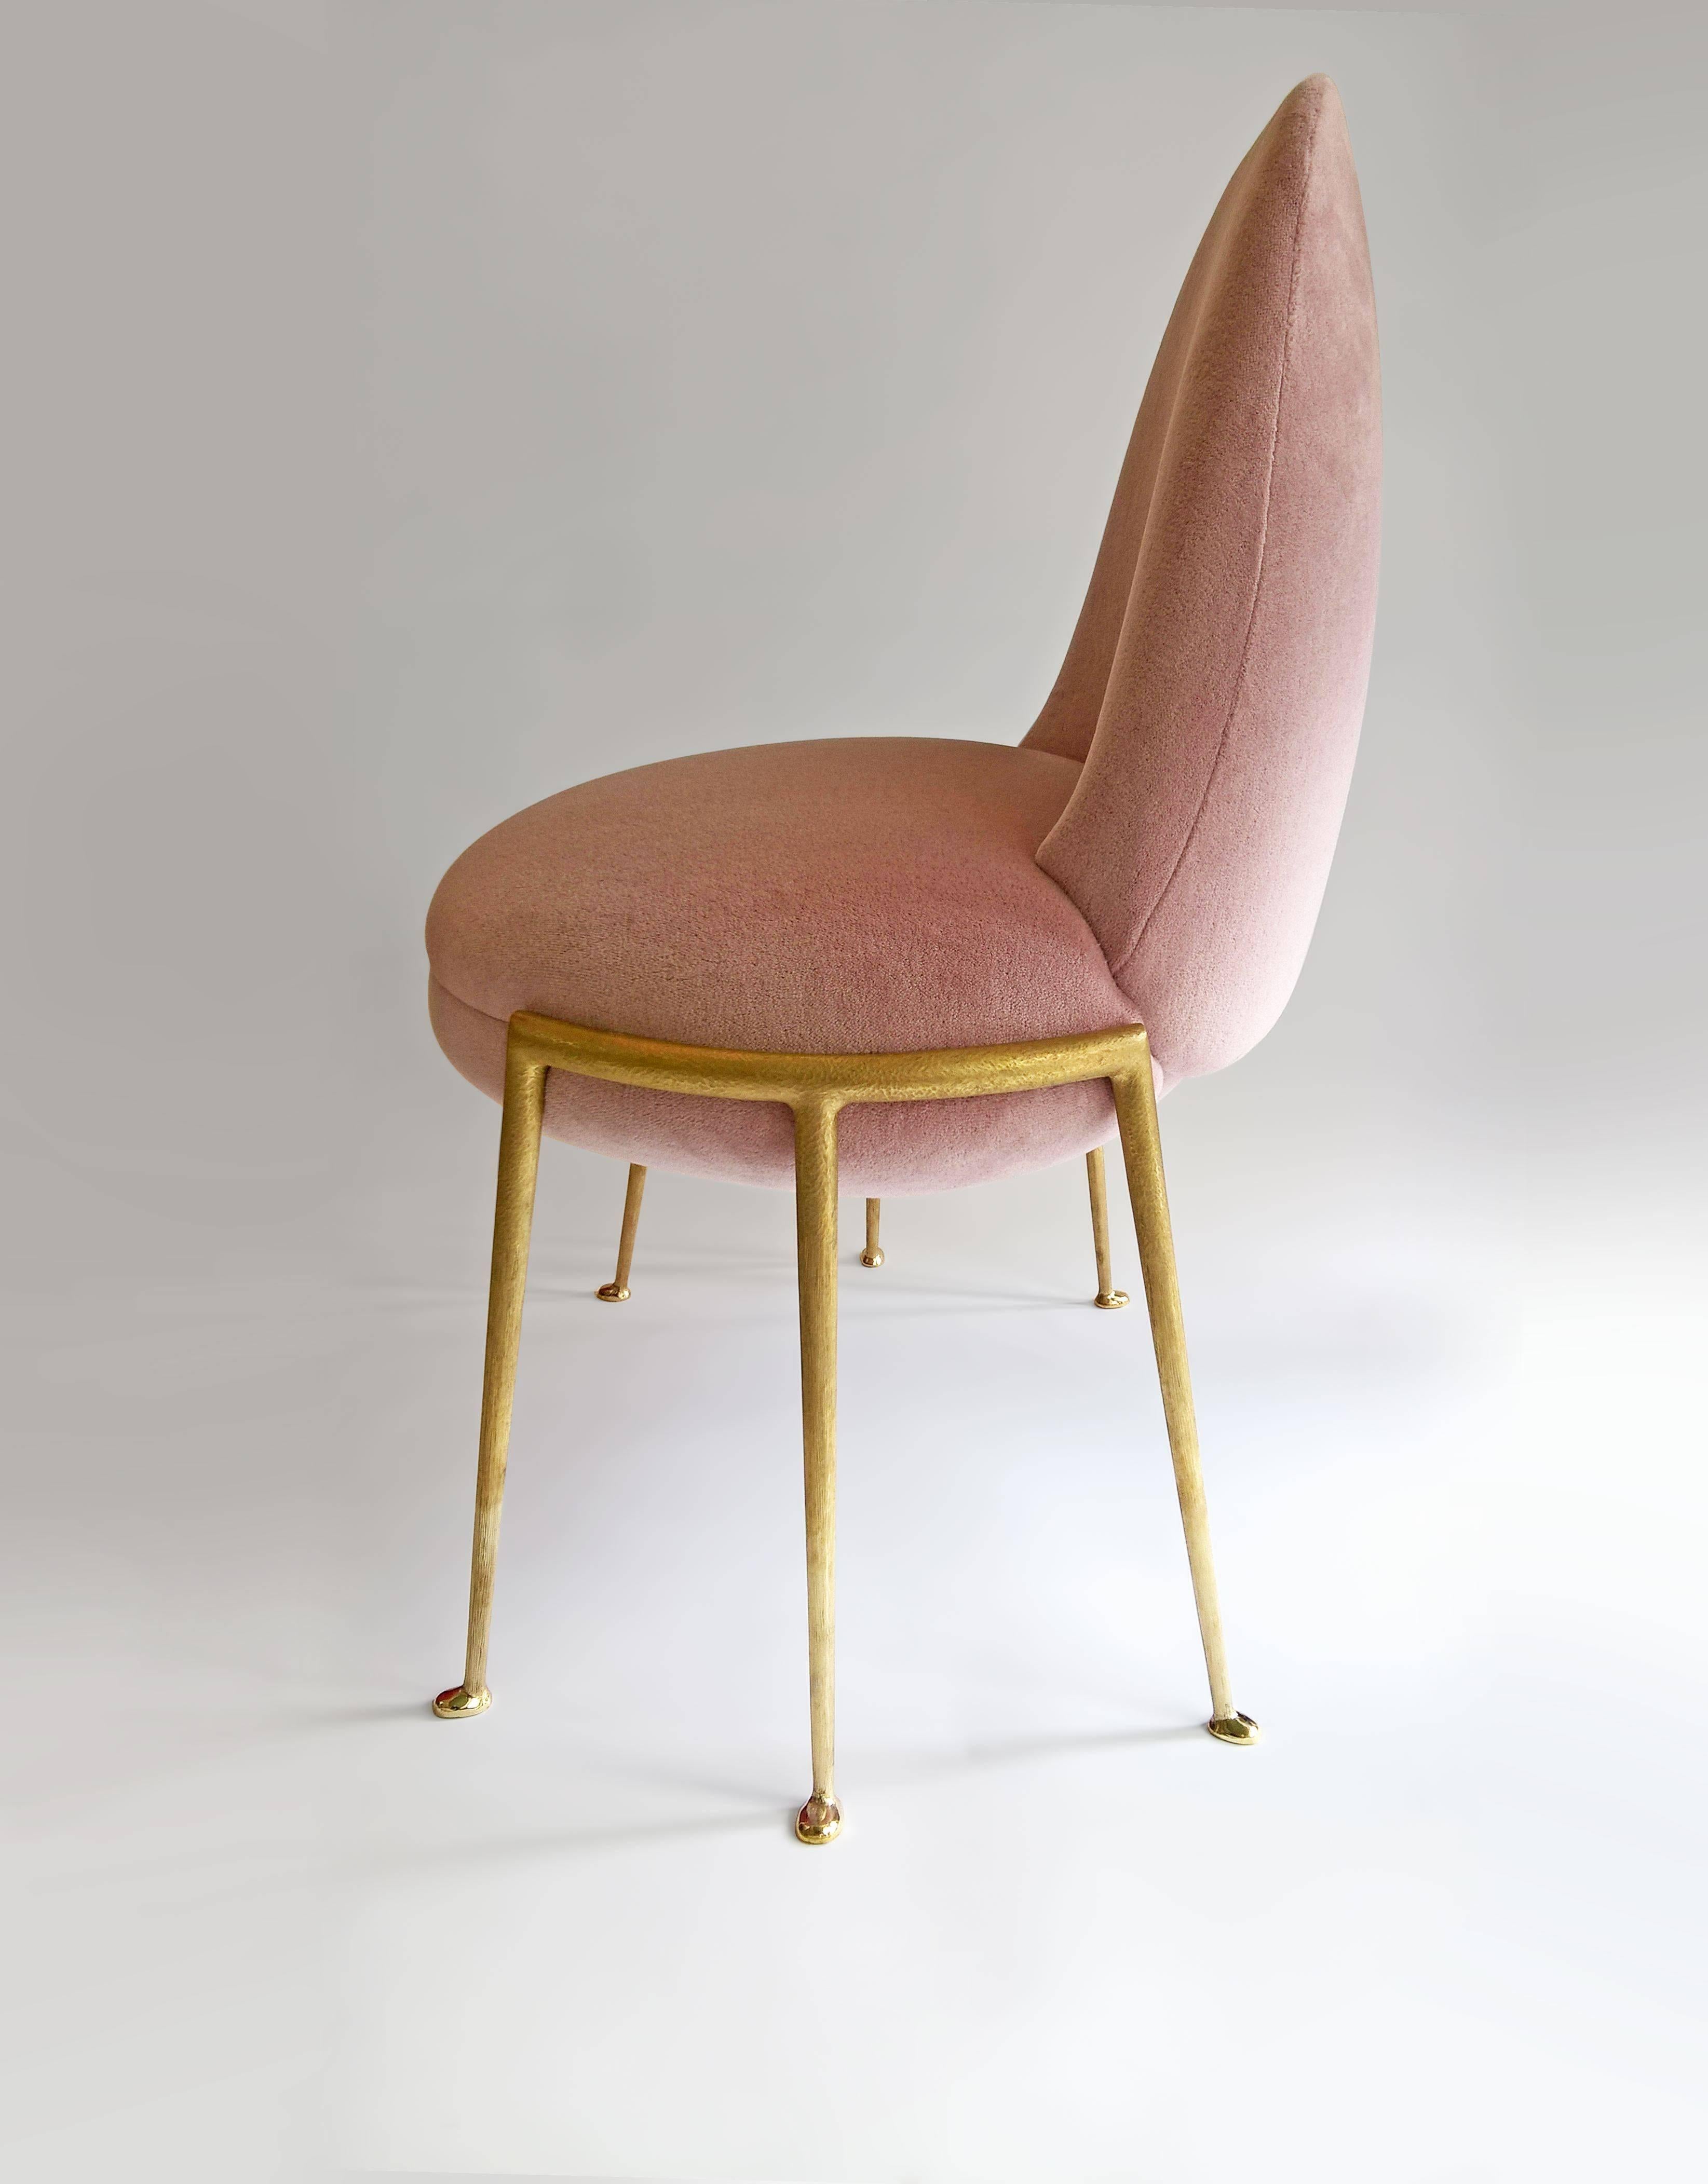 Papillia, a fanciful new side chair from Achille Salvagni, has six bronze legs, an extra-wide seat and an elegantly parabolic back.

Limited edition of 48 + AP.